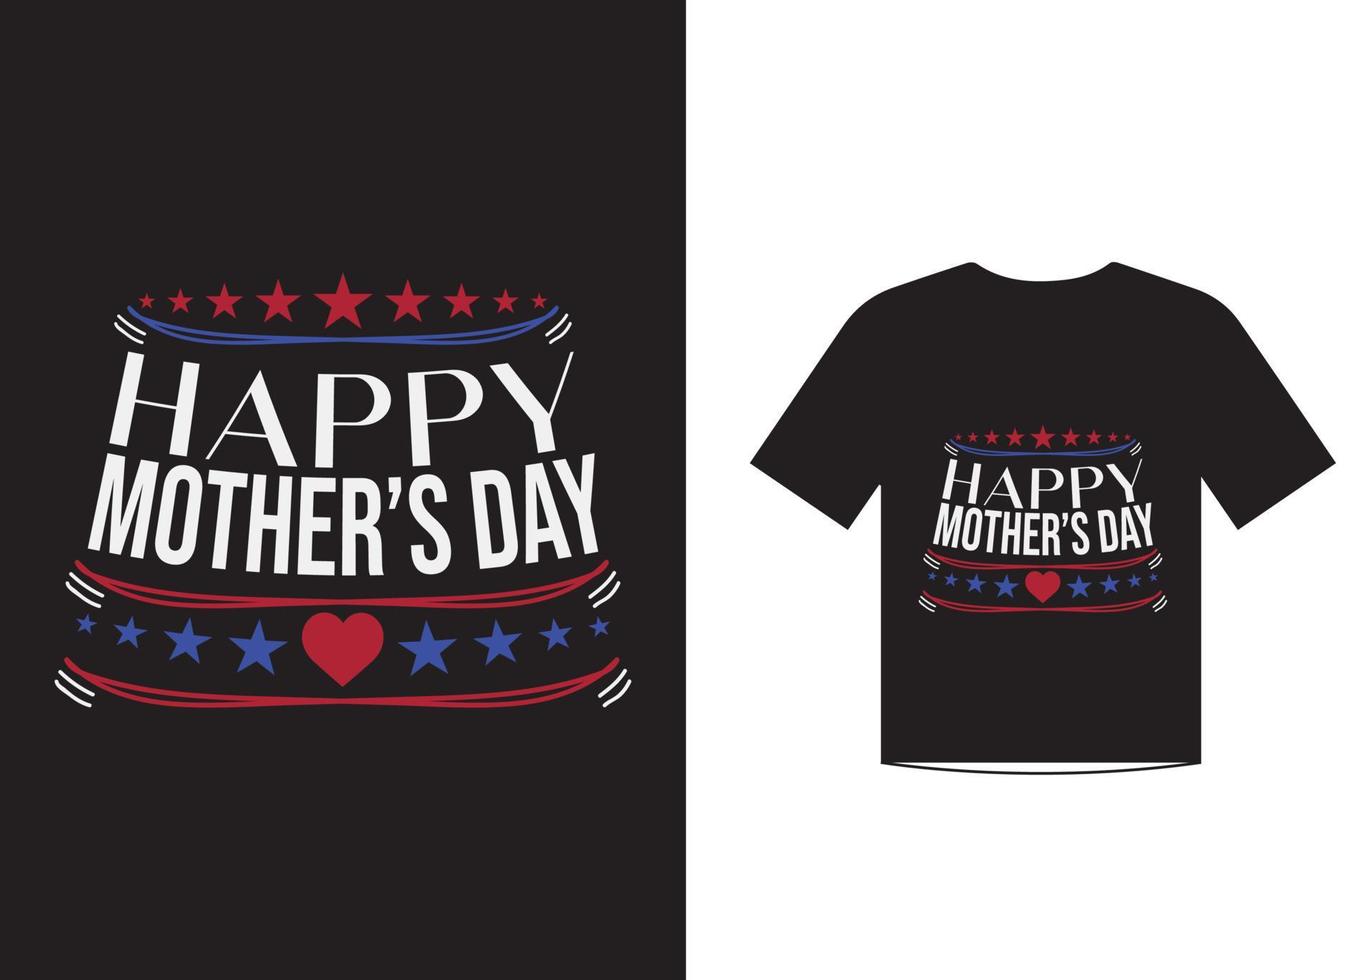 Mothers day love quotes t shirt design template vector for happy mothers day